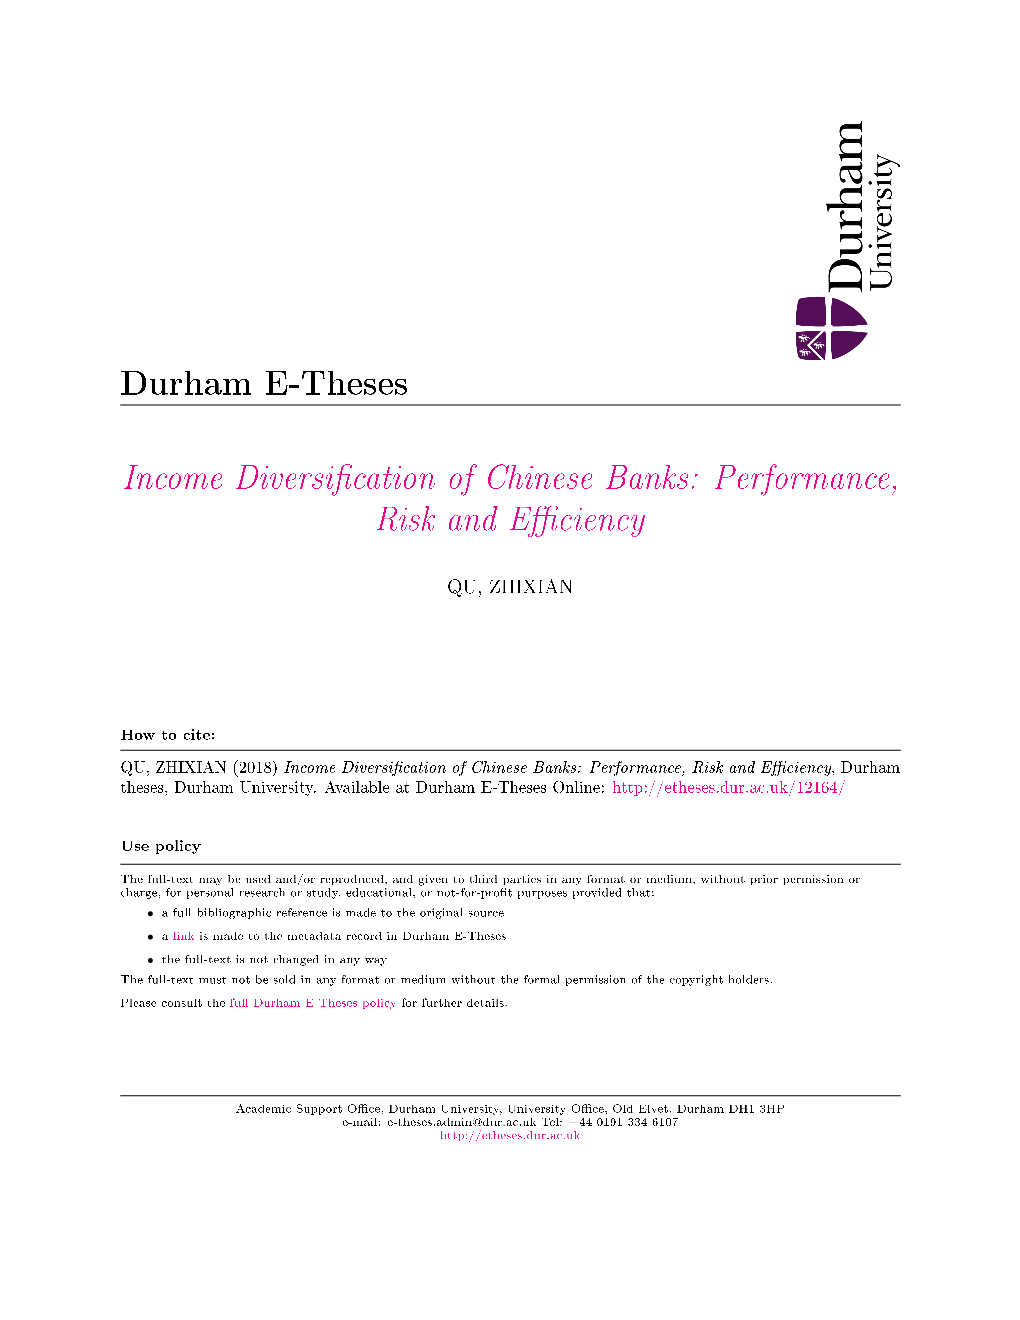 Income Diversification of Chinese Banks